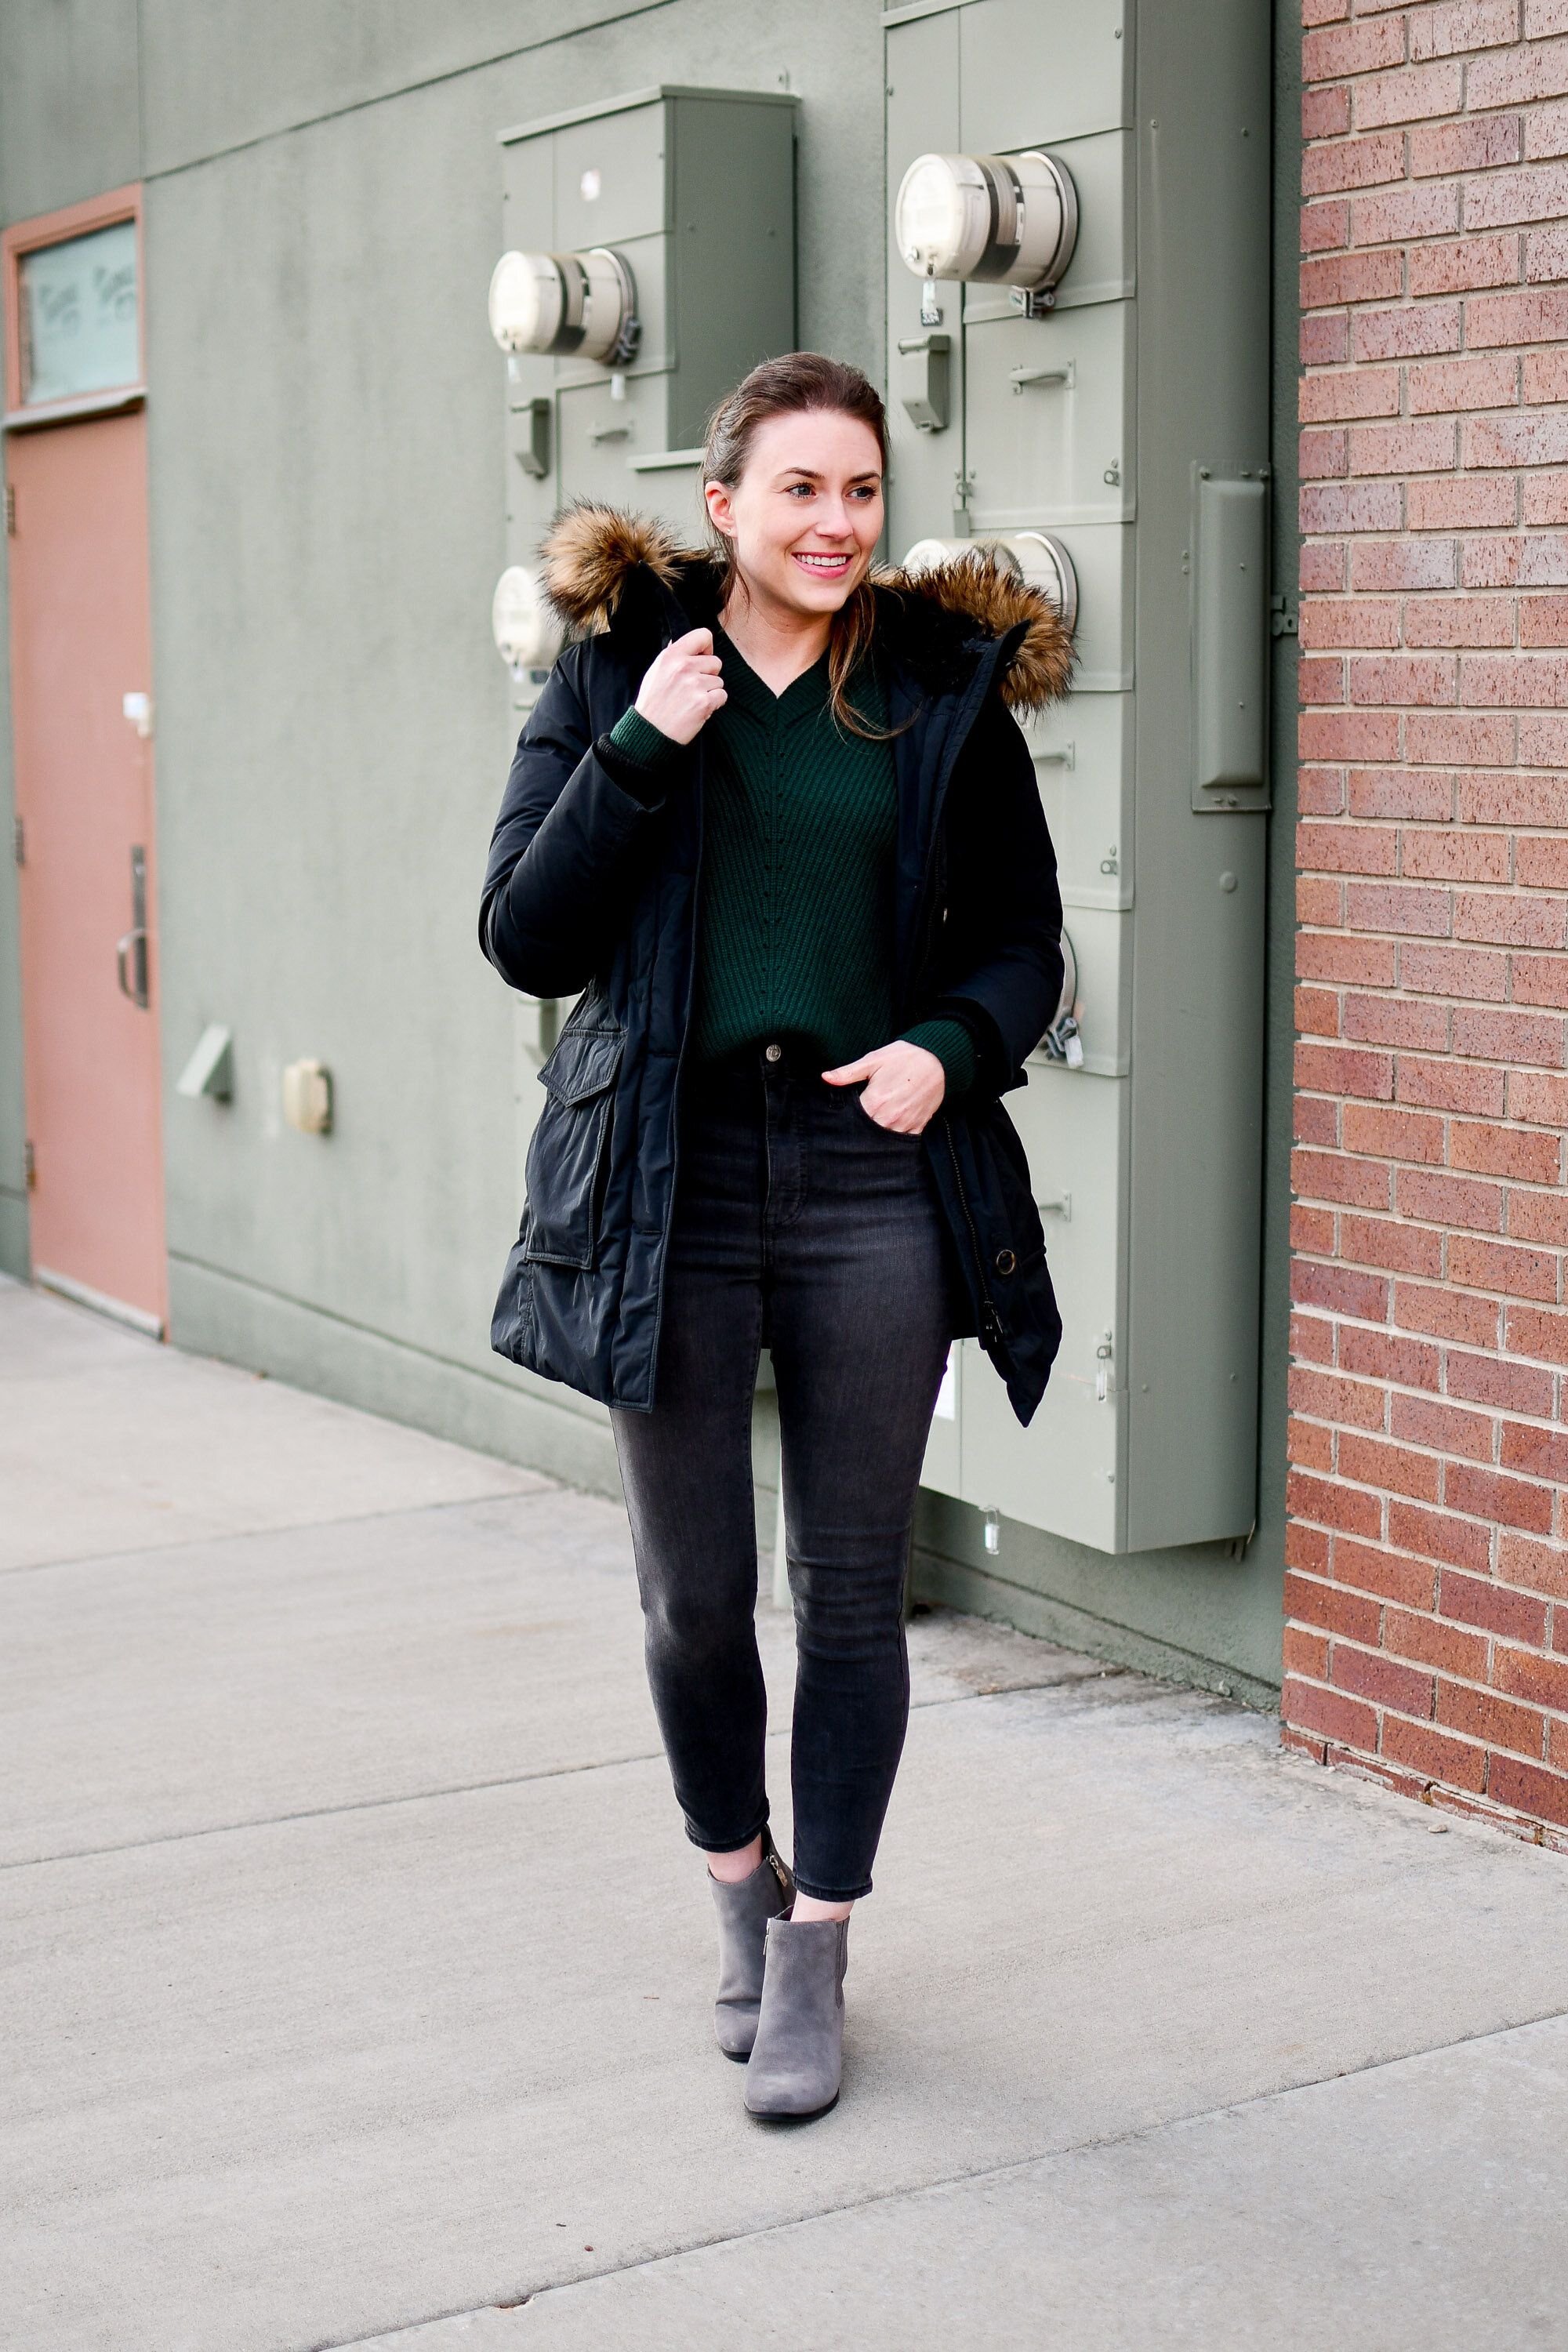 Cold weather comfort: Casual and cozy winter outfit